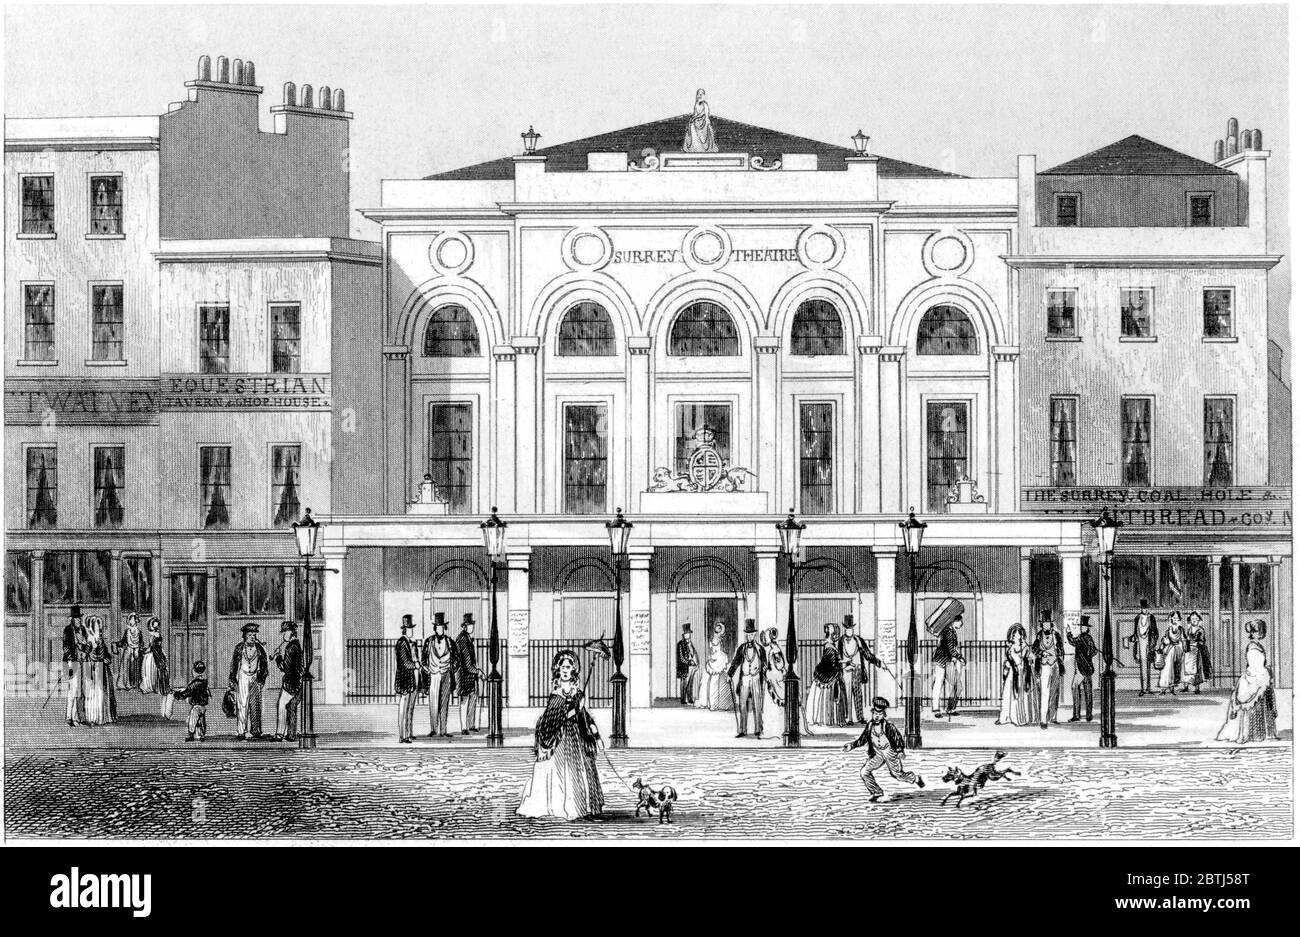 An engraving of The Surrey Theatre London scanned at high resolution from a book printed in 1851. This image is believed to be free of all copyright. Stock Photo